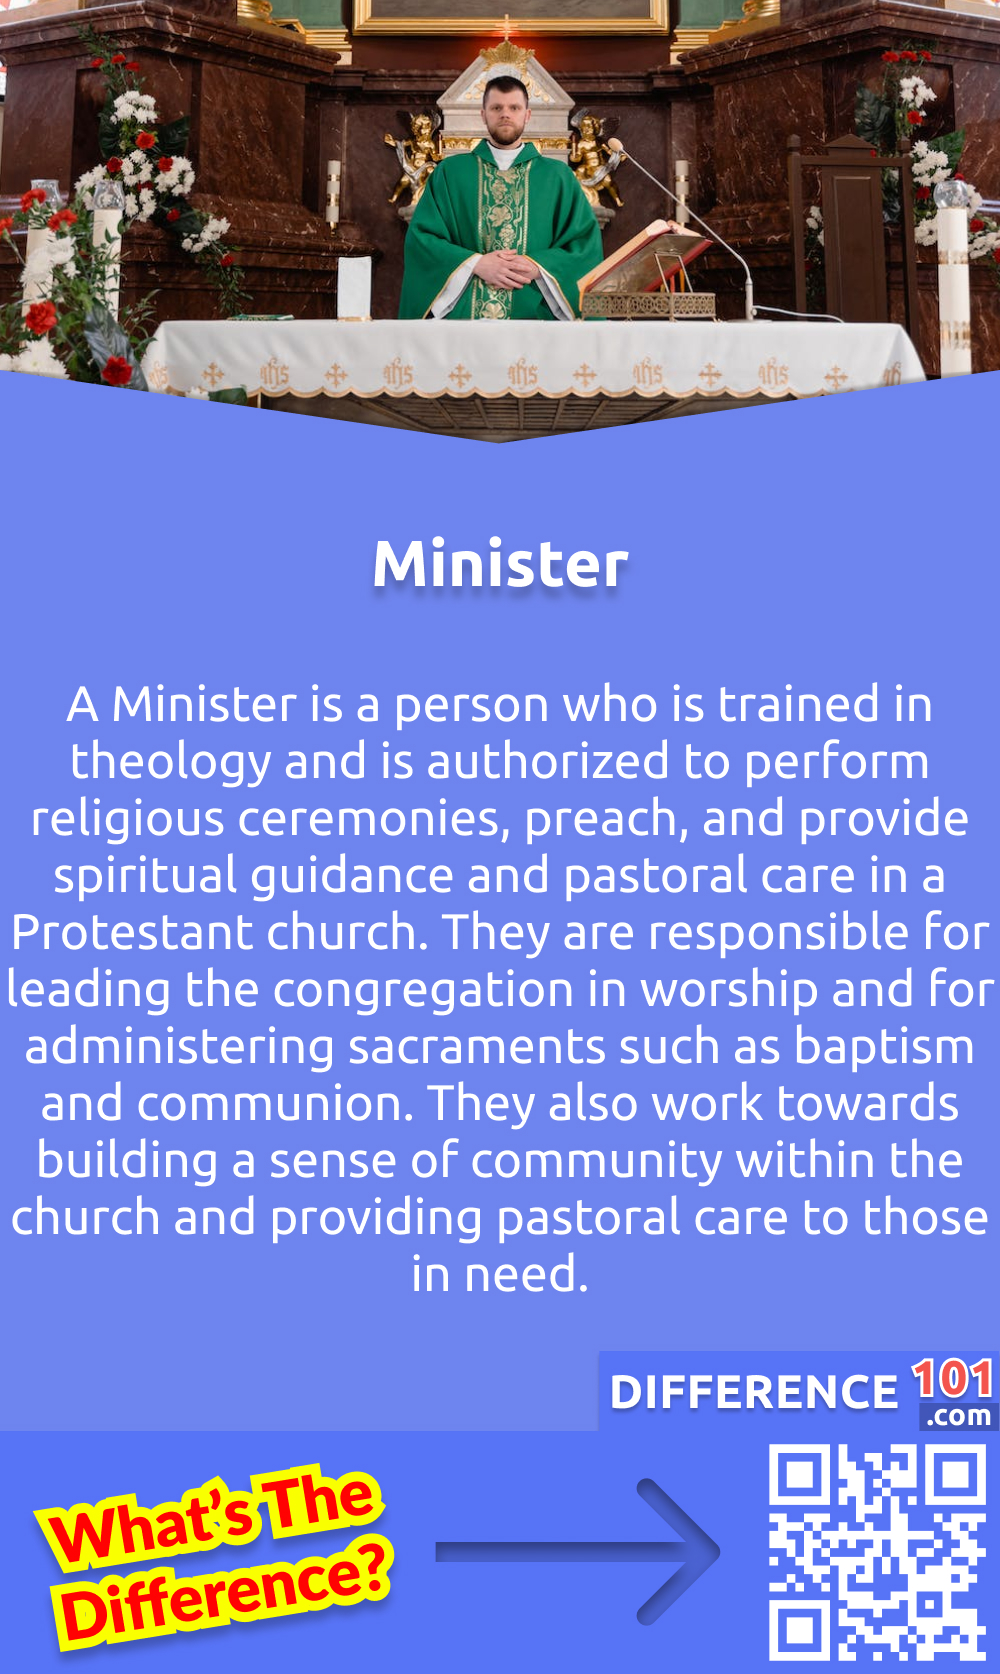 What Is Minister? A Minister is a person who is trained in theology and is authorized to perform religious ceremonies, preach, and provide spiritual guidance and pastoral care in a Protestant church. They are responsible for leading the congregation in worship and for administering sacraments such as baptism and communion. They also work towards building a sense of community within the church and providing pastoral care to those in need. This can include counseling, visiting the sick and elderly, and offering support to individuals and families facing challenges. A Minister is not only a spiritual leader, but also an educator and facilitator, encouraging their congregation to explore and deepen their faith.